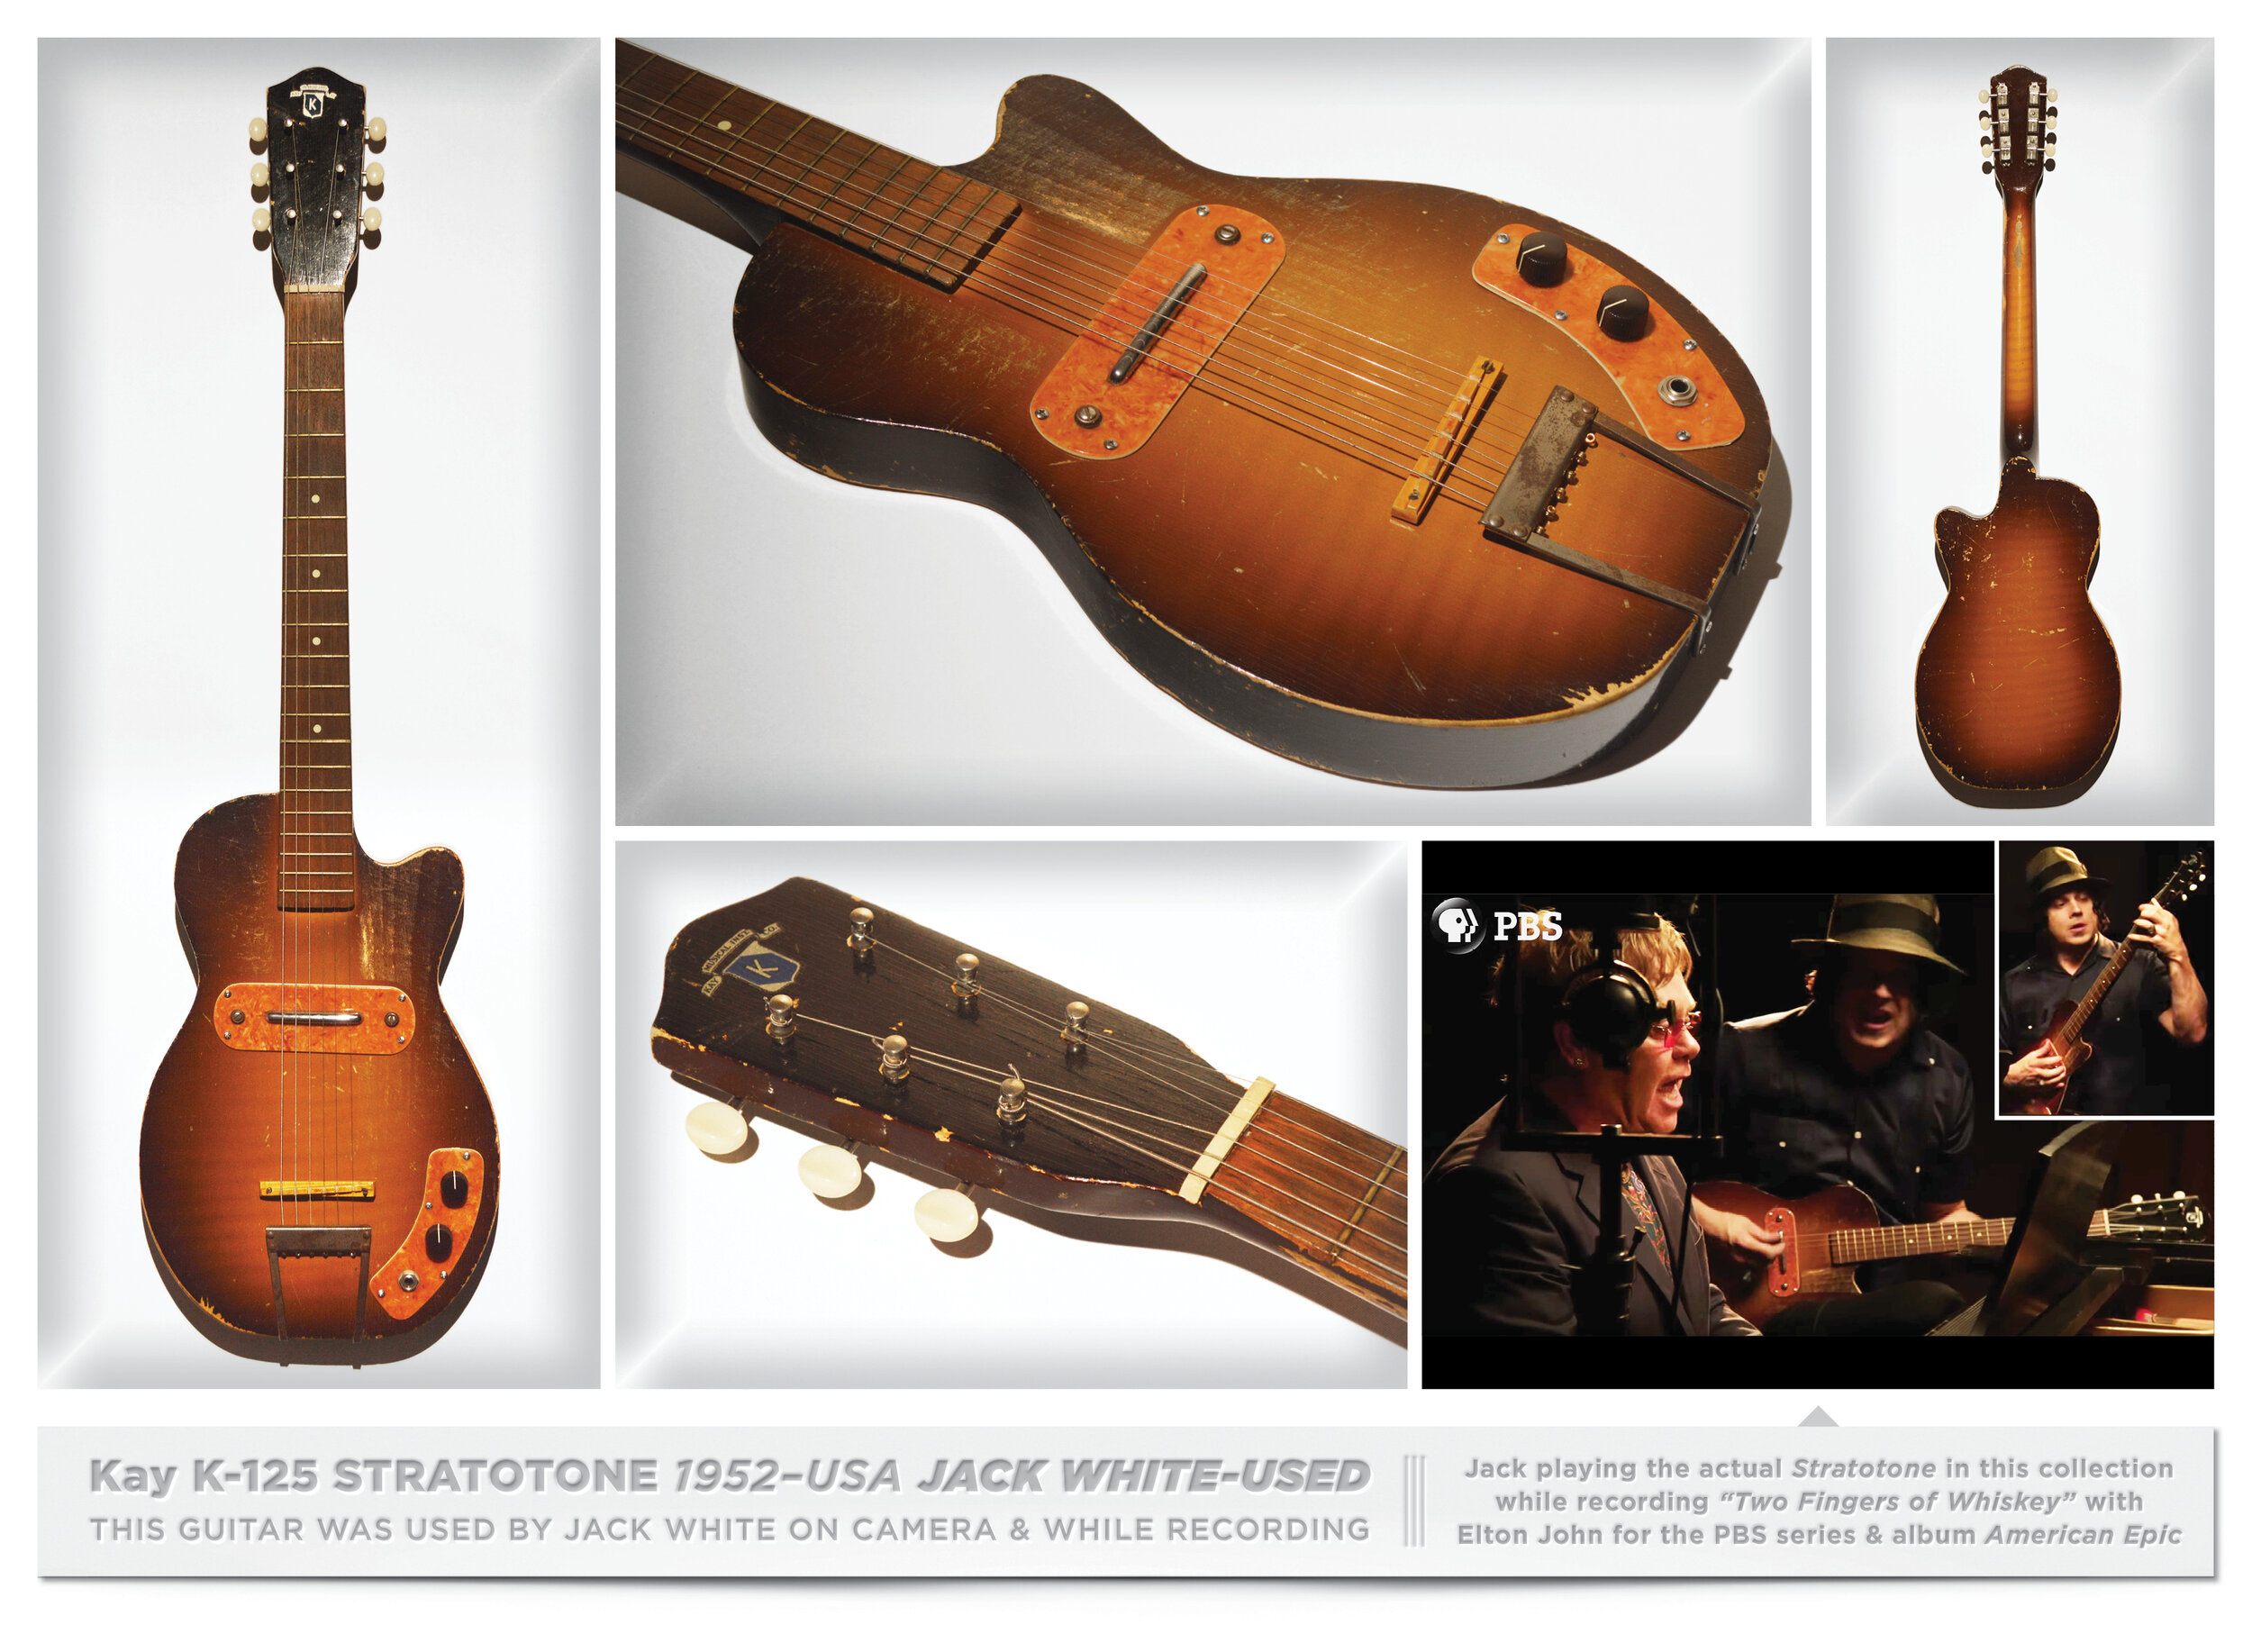 13 Kay K-125 STRATOTONE 1952–USA JACK WHITE-USED THE JACK WHITE GUITAR COLLECTION FINAL LAYOUT13.jpg